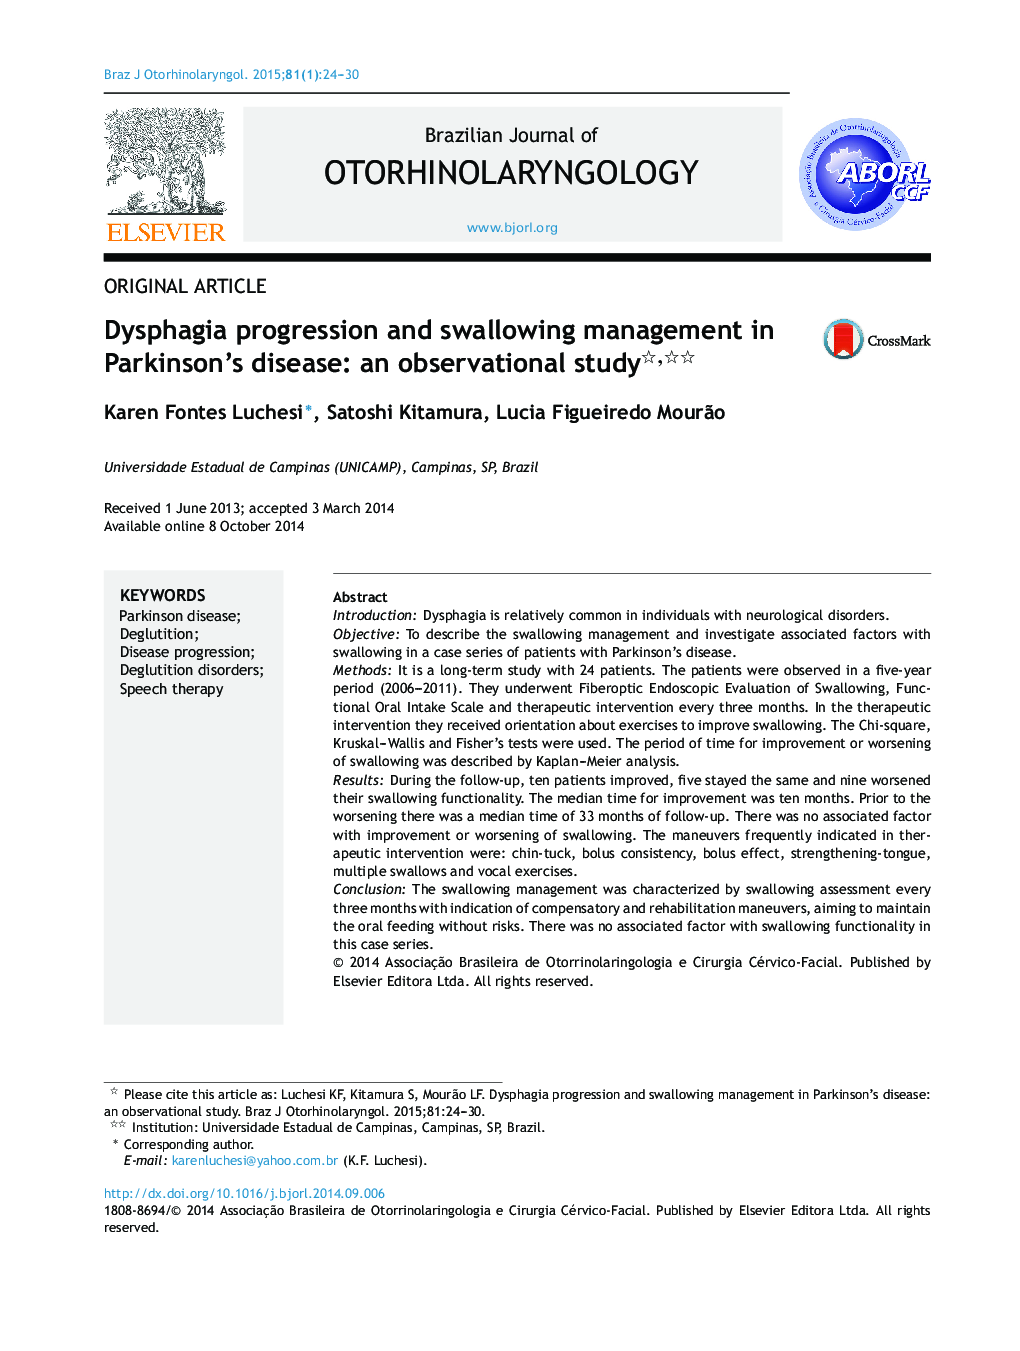 Dysphagia progression and swallowing management in Parkinson's disease: an observational study 